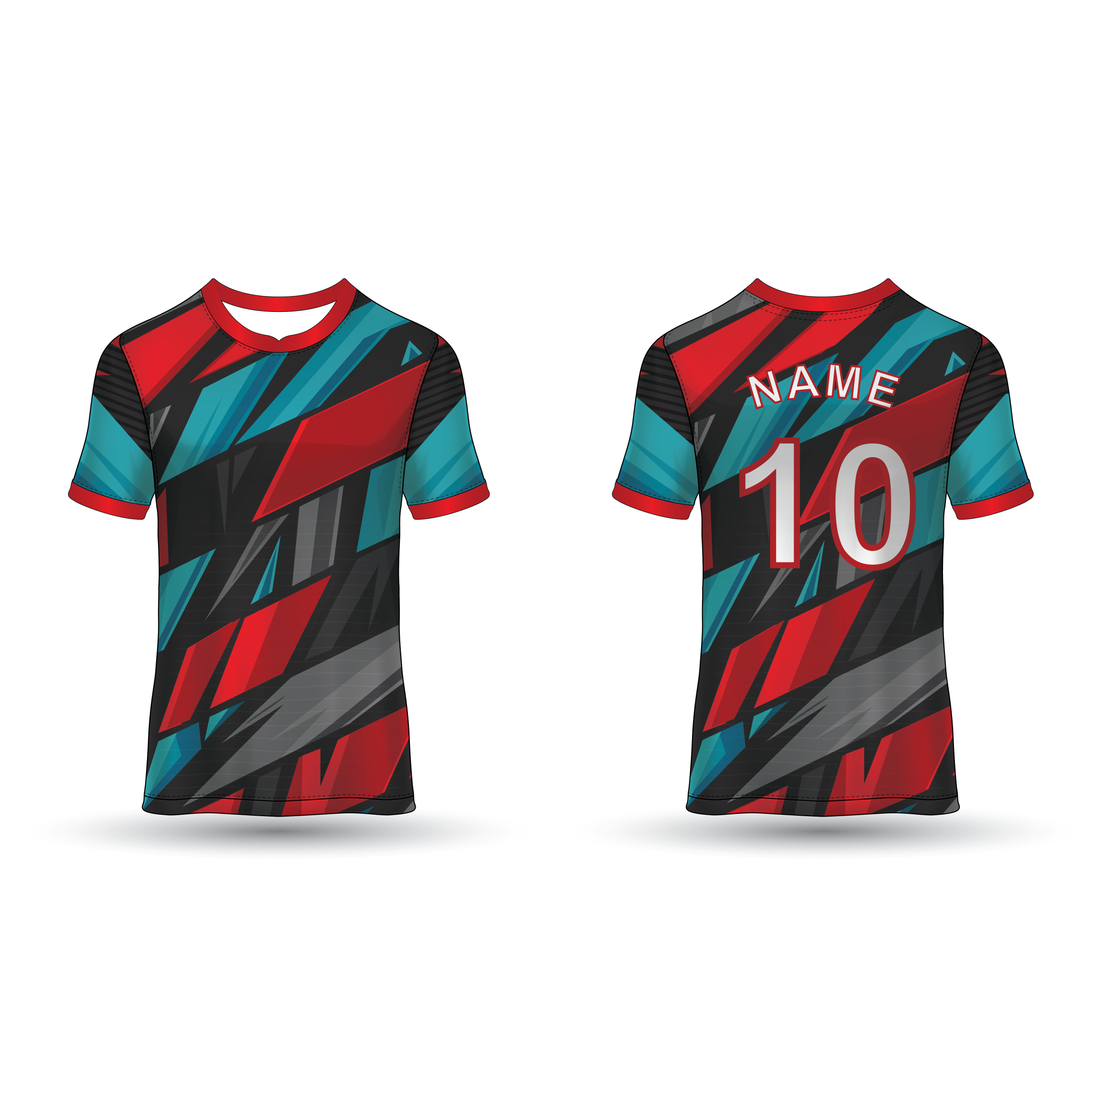 NEXT PRINT All Over Printed Customized Sublimation T-Shirt Unisex Sports Jersey Player Name & Number, Team Name NP50000214